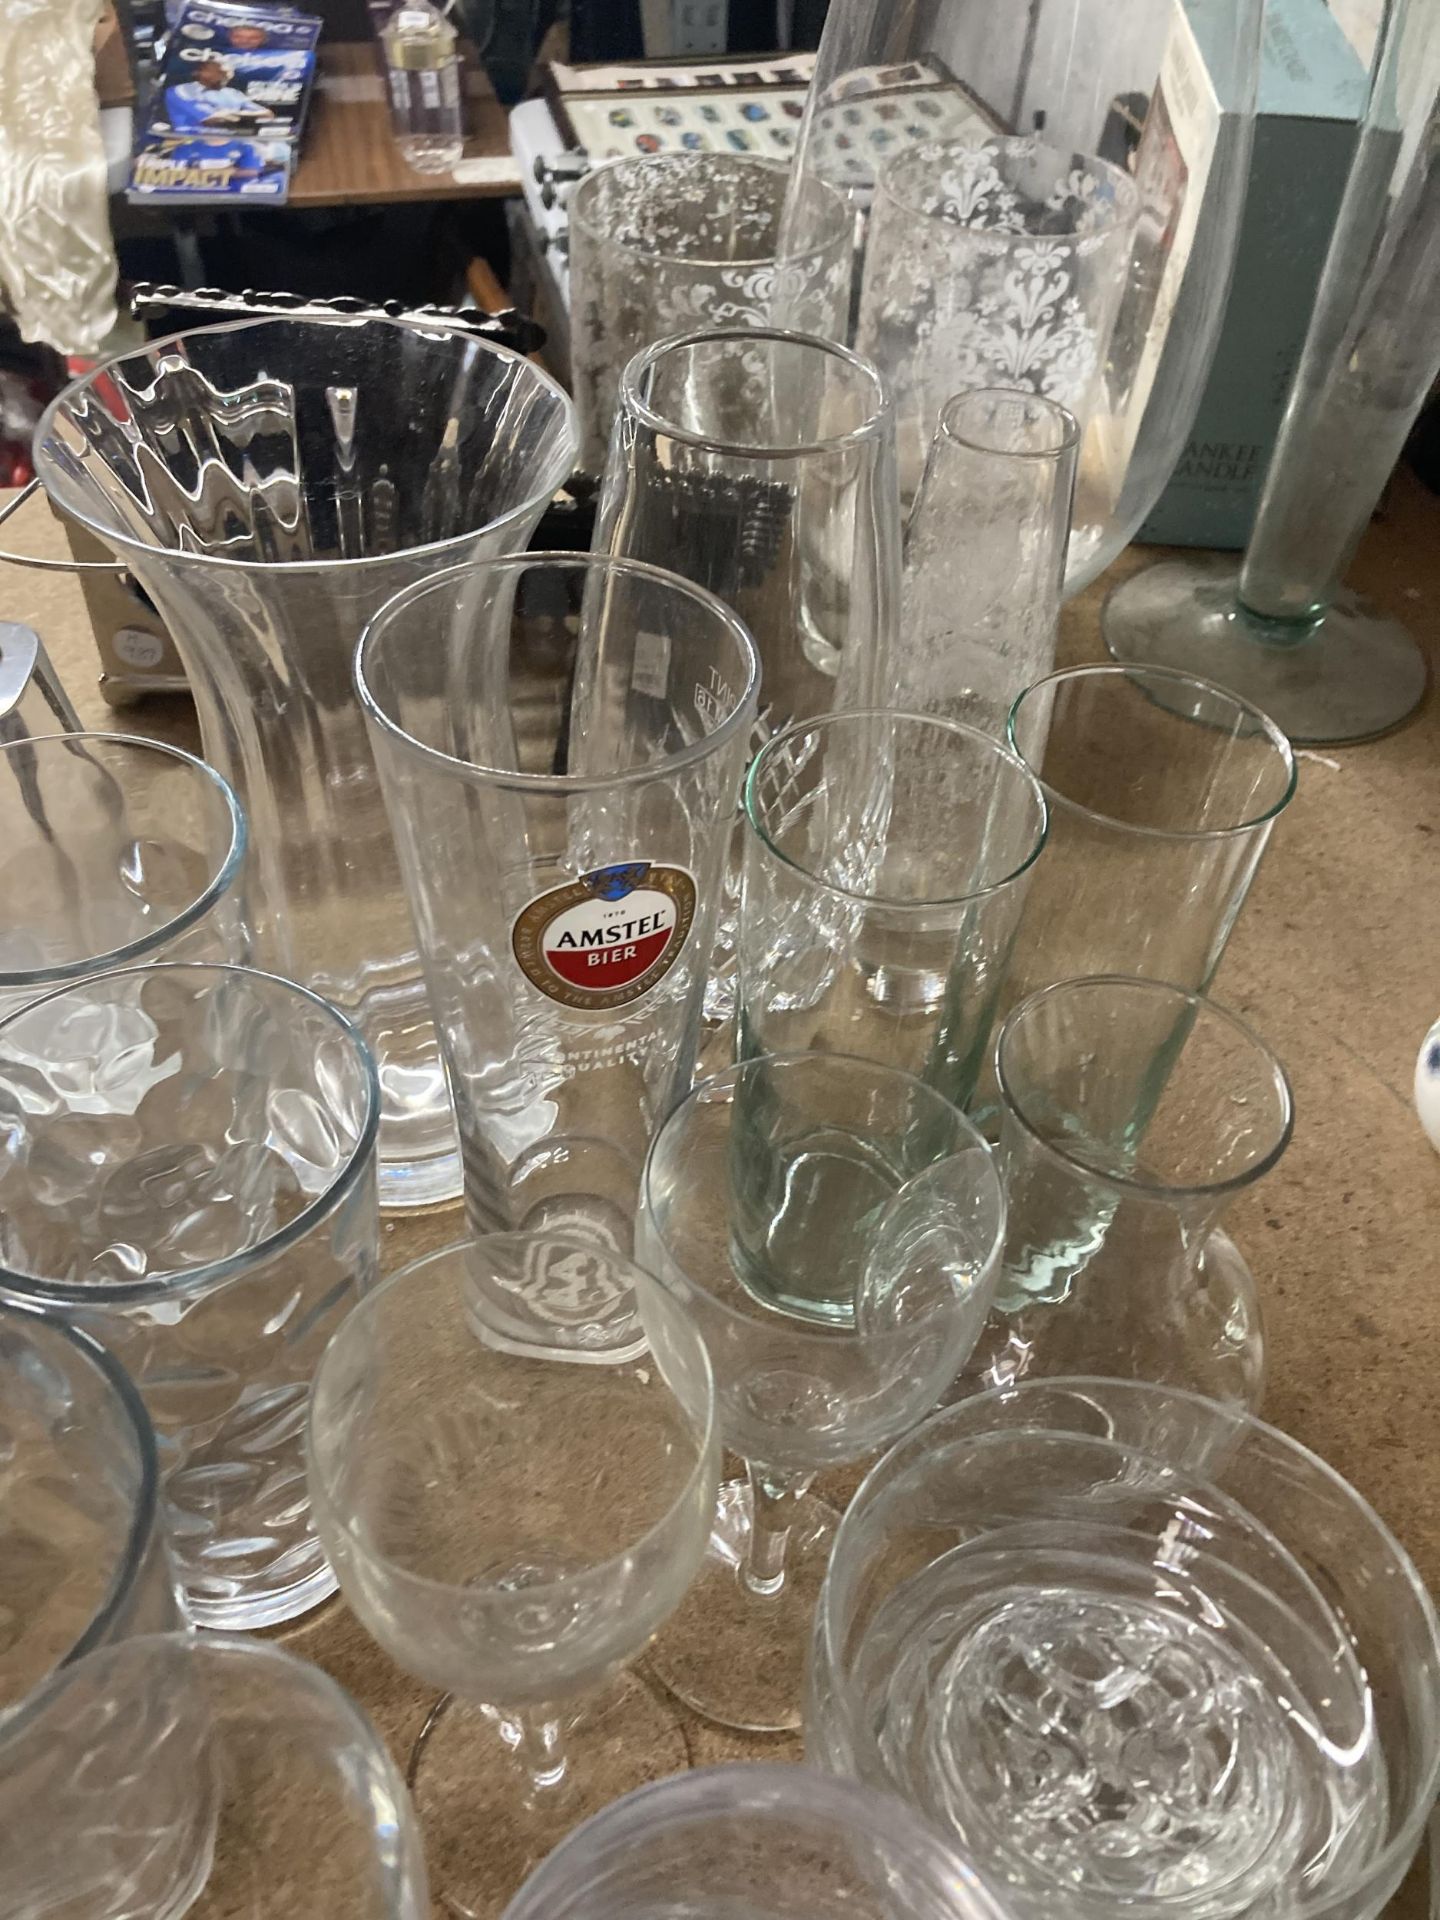 A LARGE QUANTITY OF GLASSES TO INCLUDE WINE, SHERRY, LICQUER, TUMBLERS, DESSERT BOWLS, VASES, ETC - Image 3 of 3